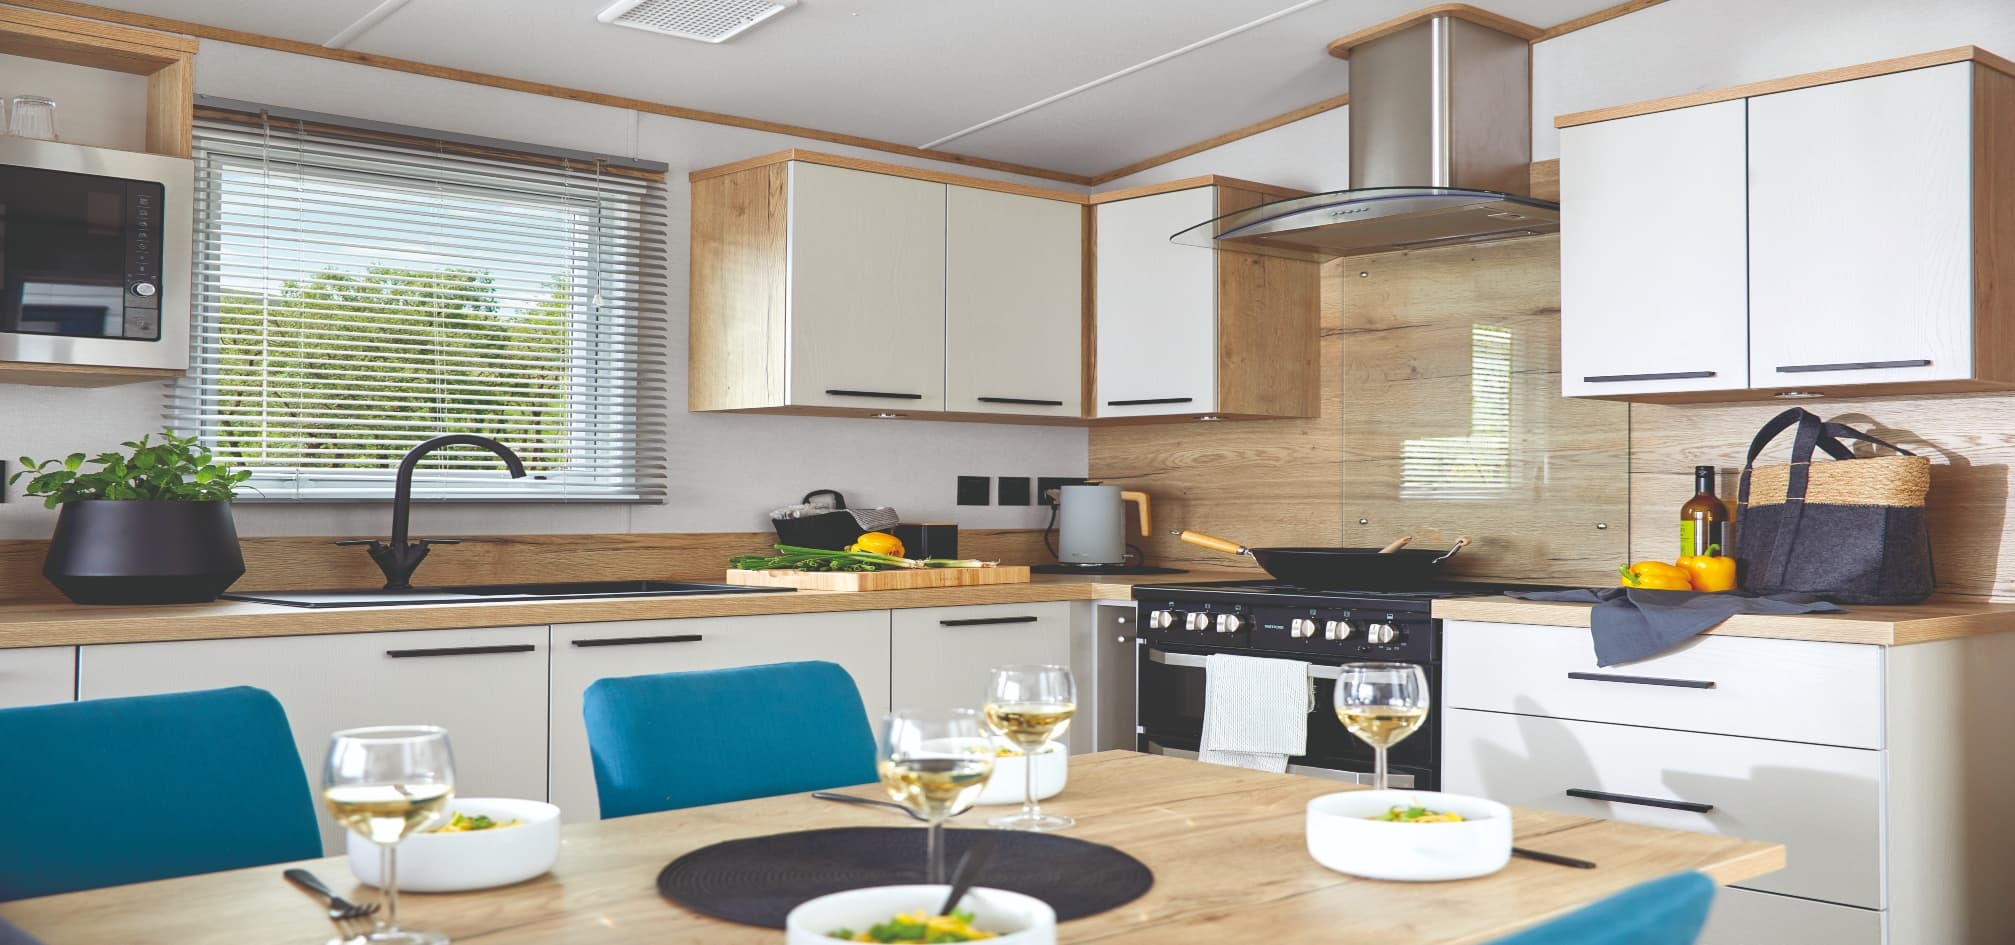 spacious kitchen and living room in a caravan